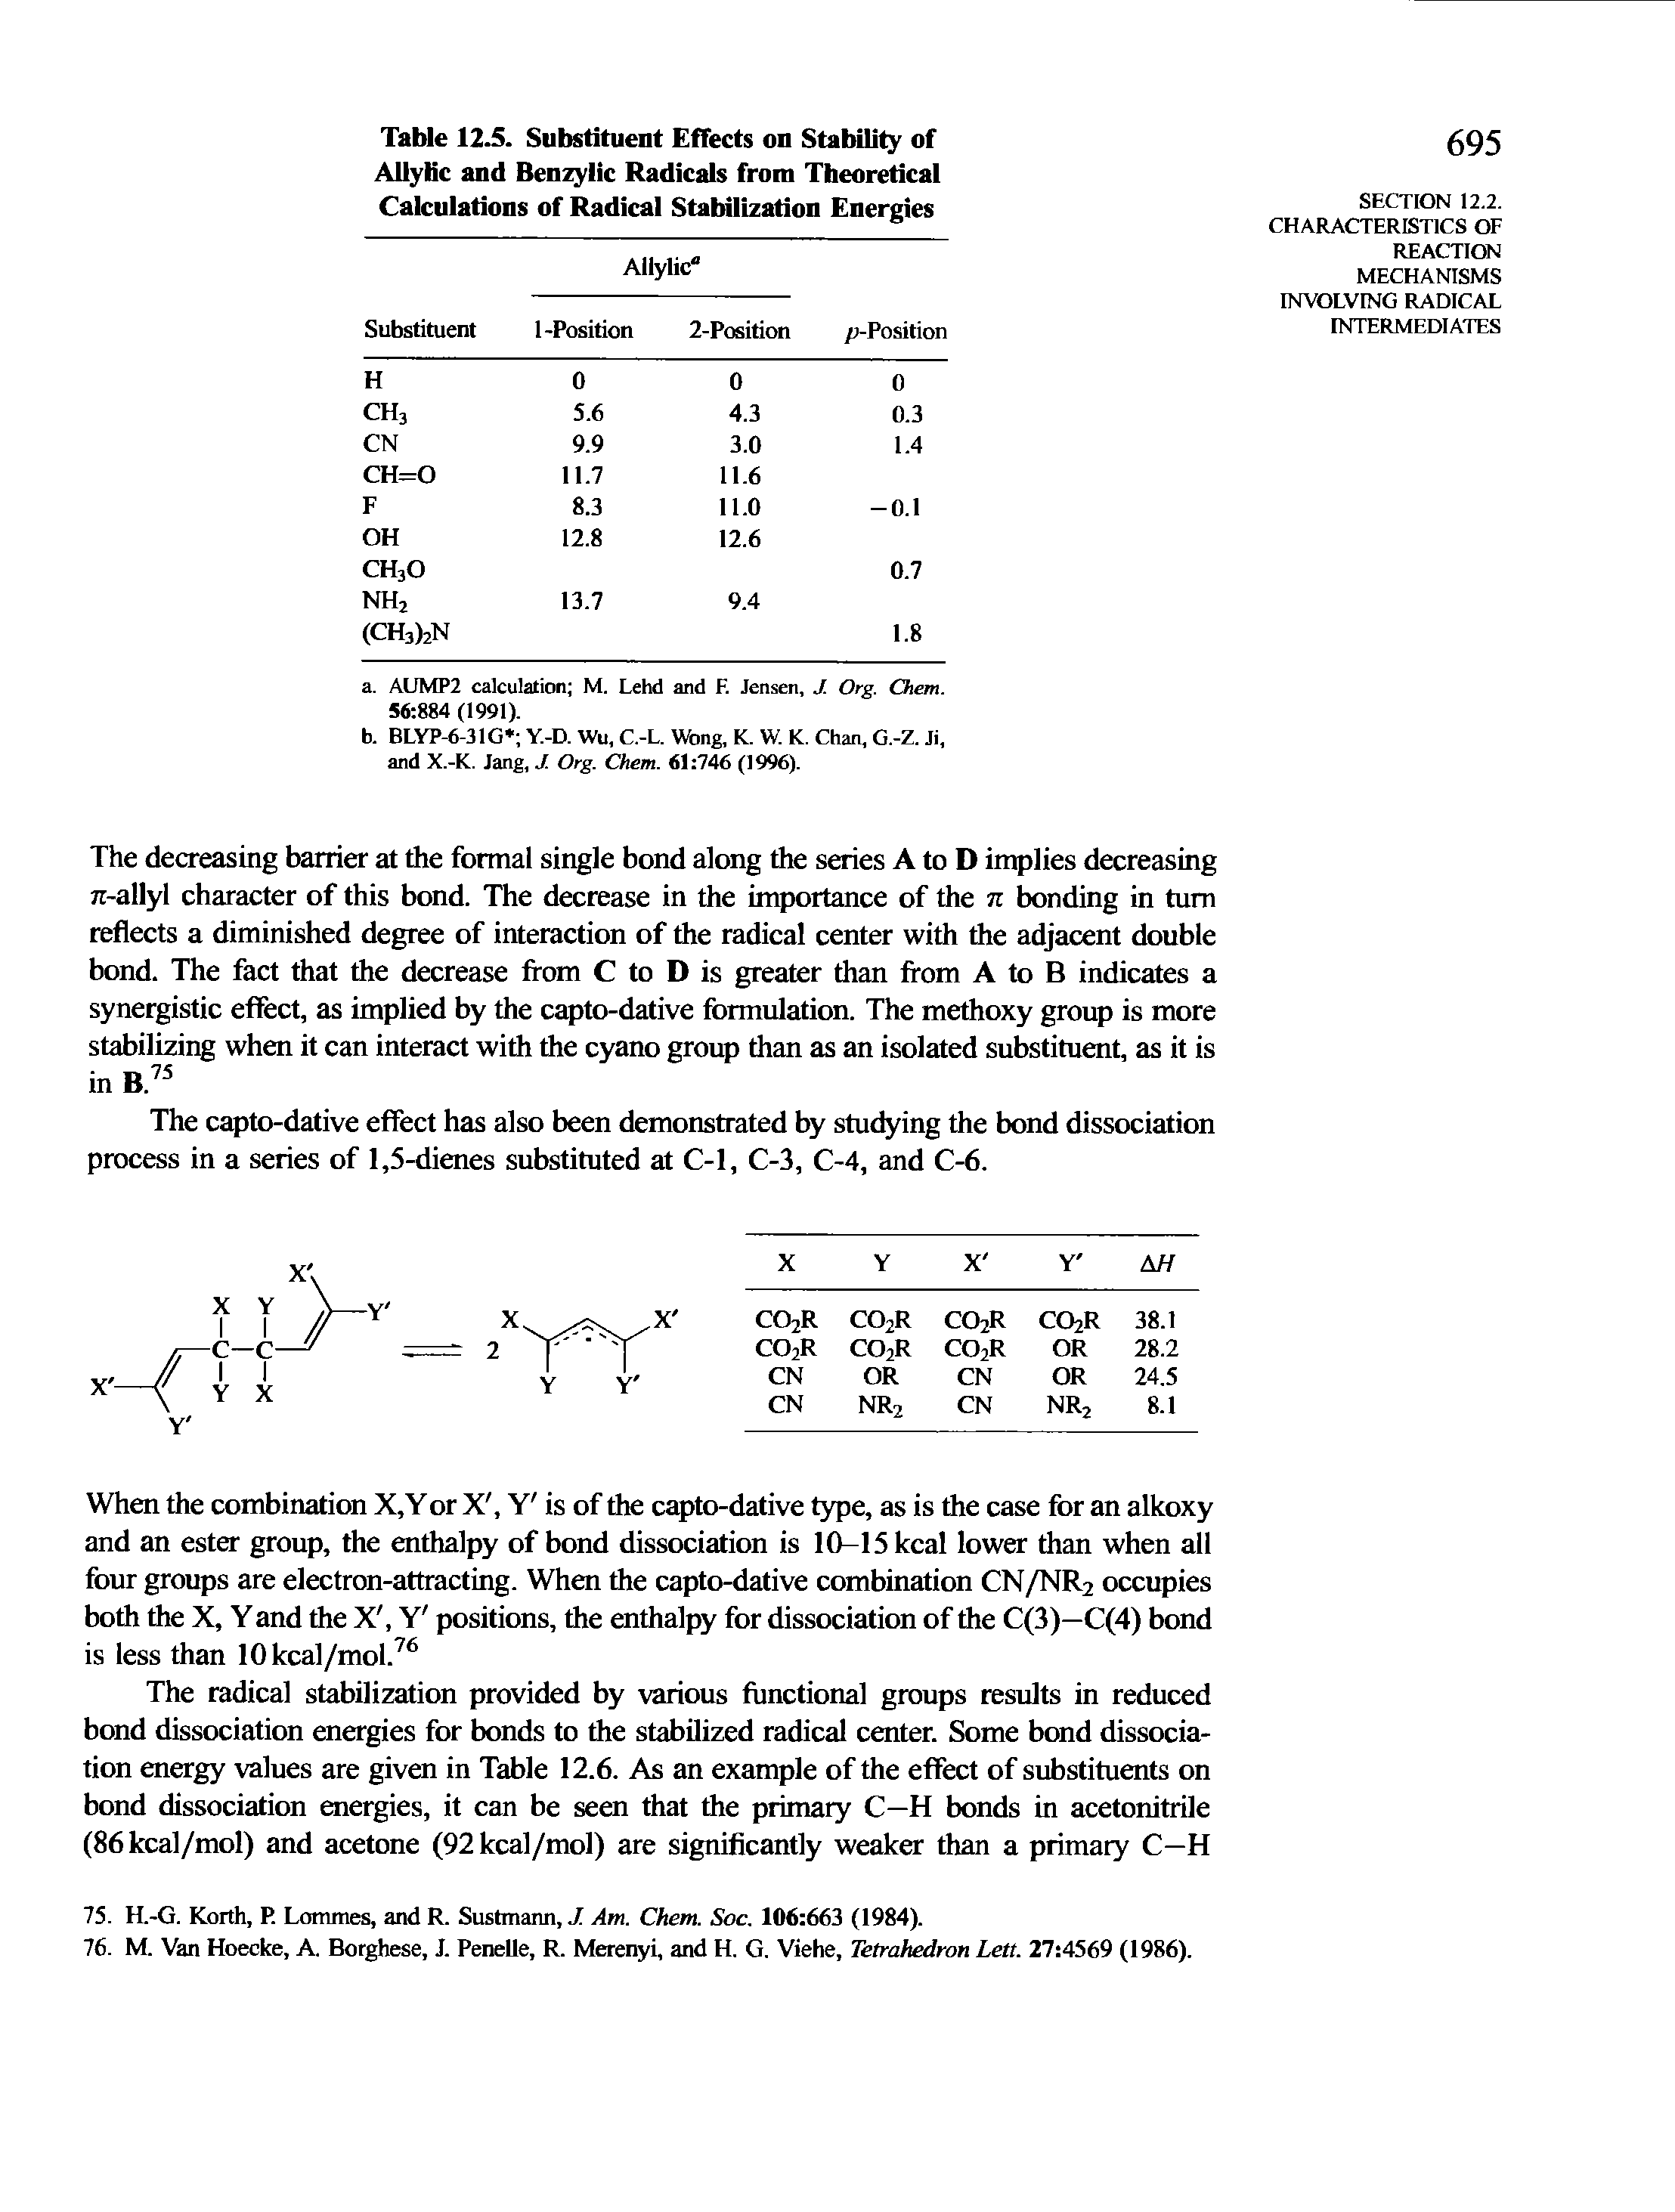 Table 12.5. Substituent Effects on Stability of AilyUc and Benzyiic Radicals from Theoretical Calculations of Radical Stabilization Energies...